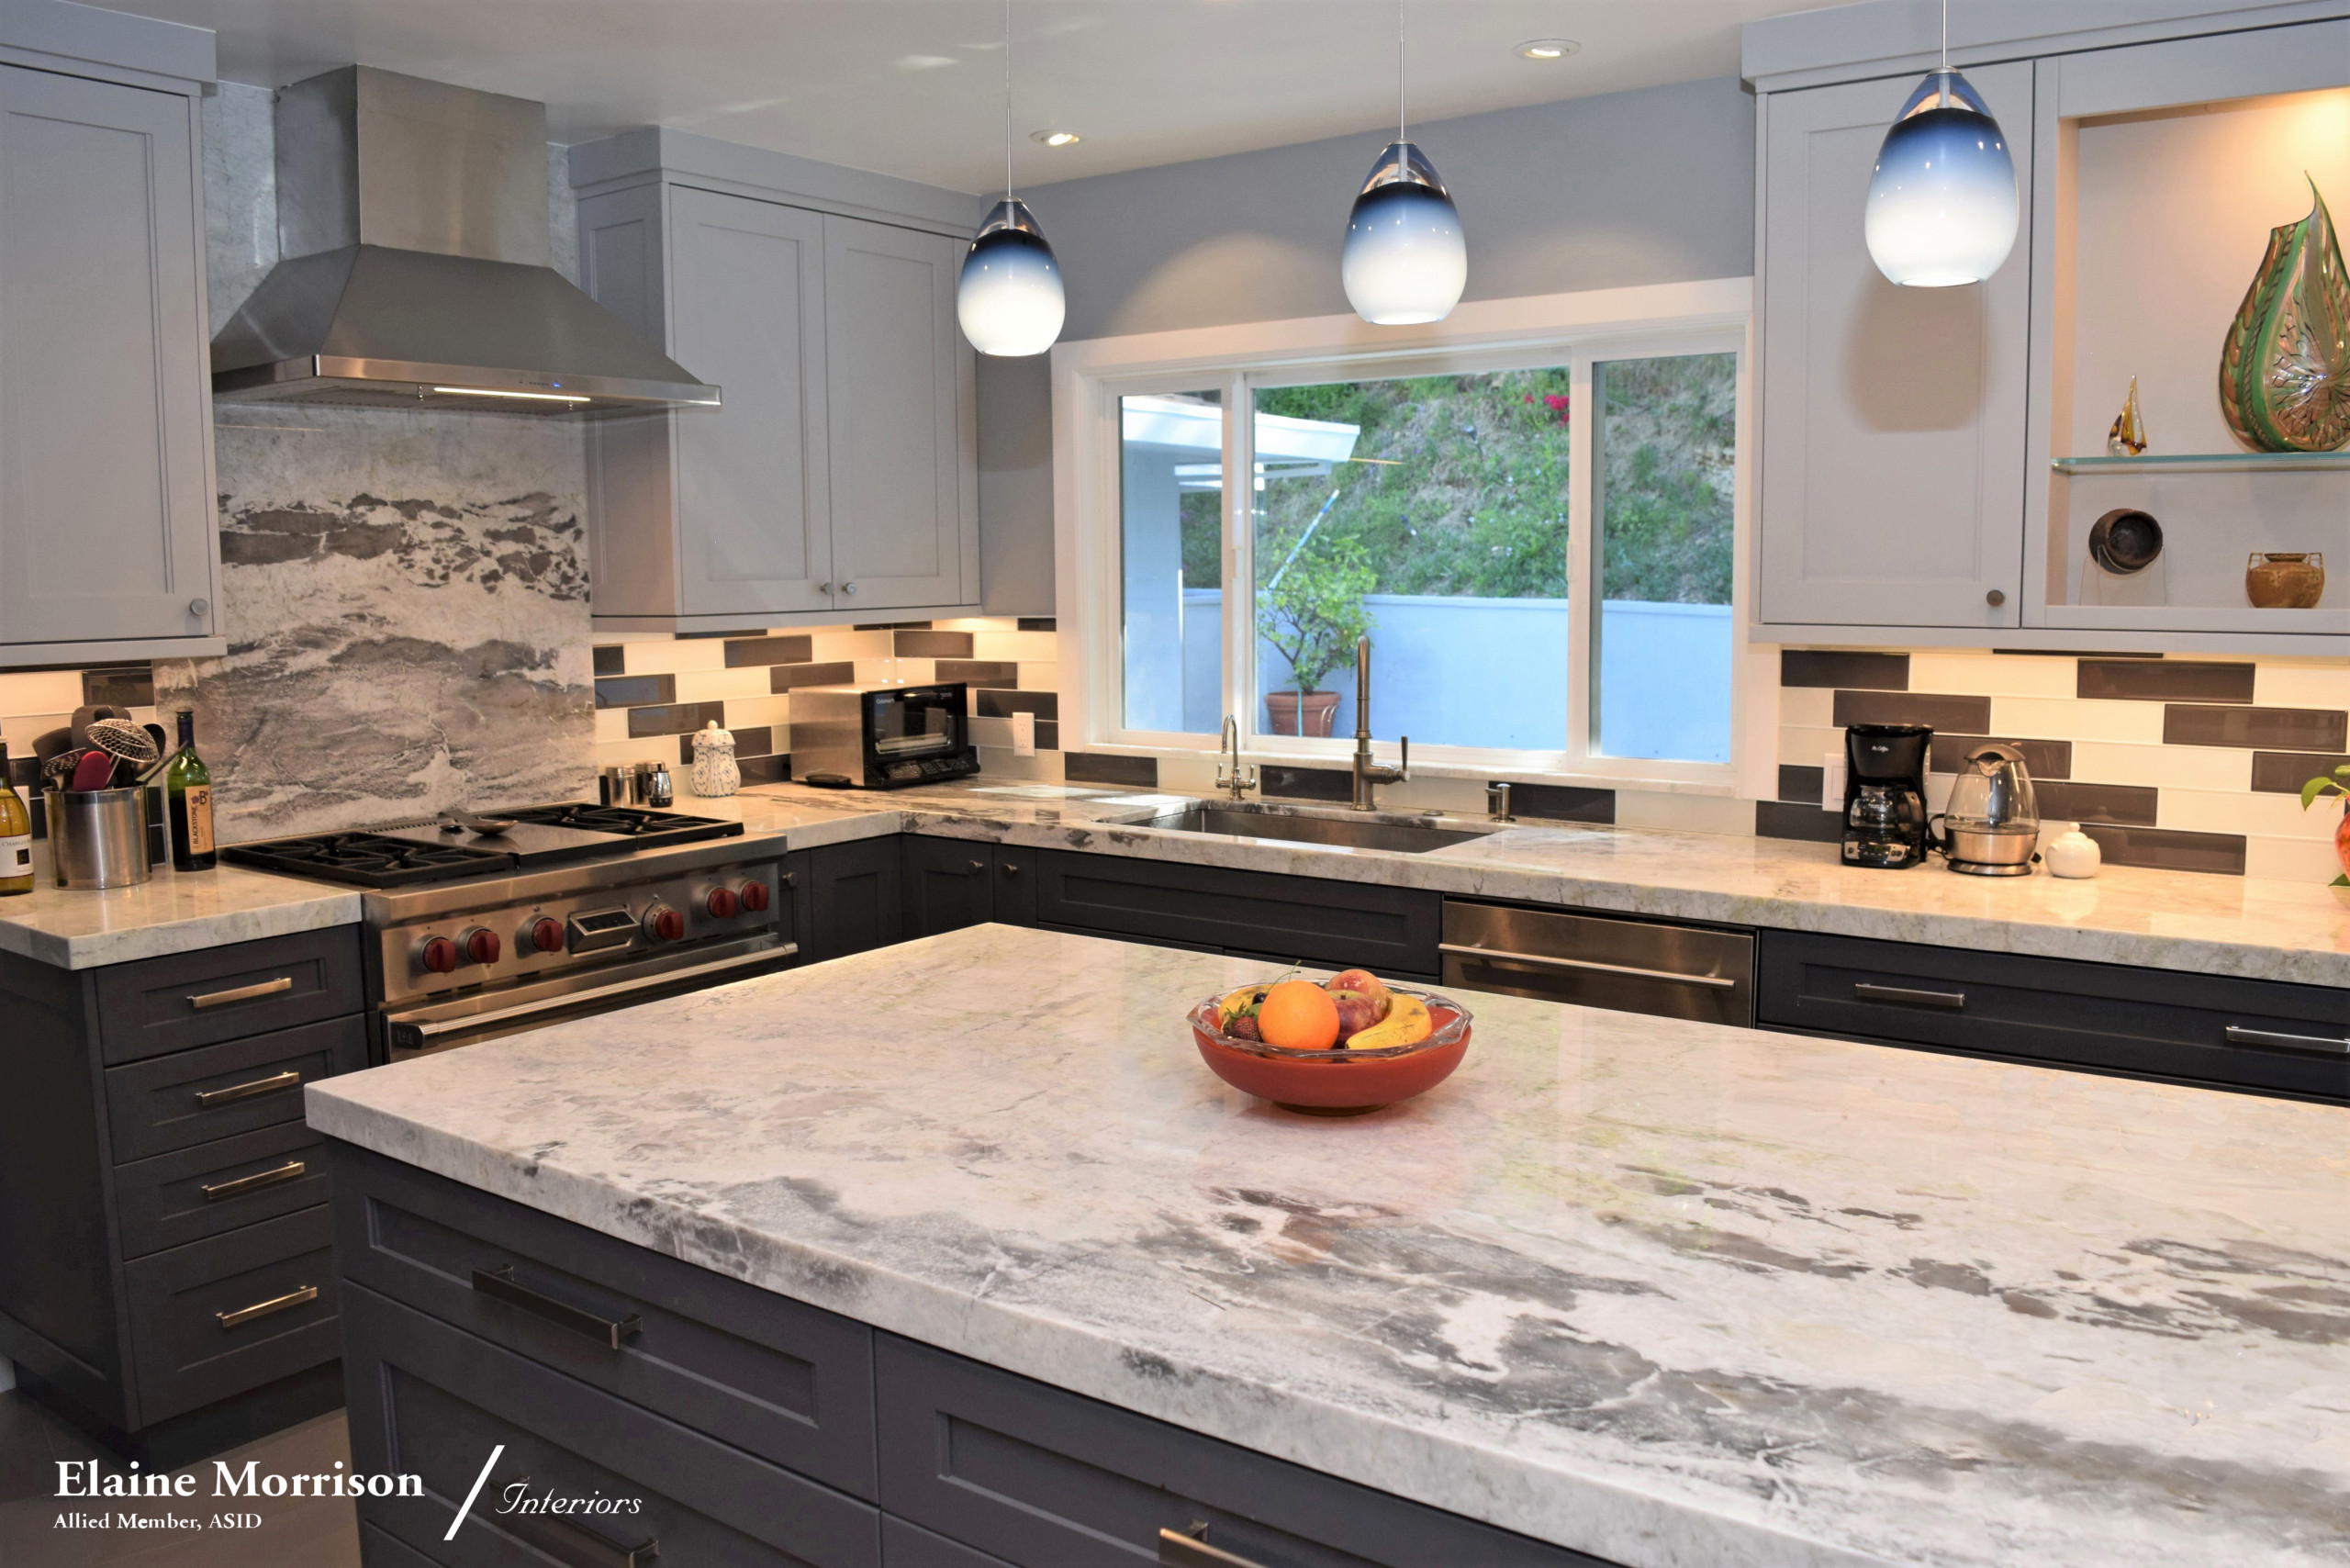 My Transitional Kitchen Remodel for a Client in Sherman Oaks, Ca.